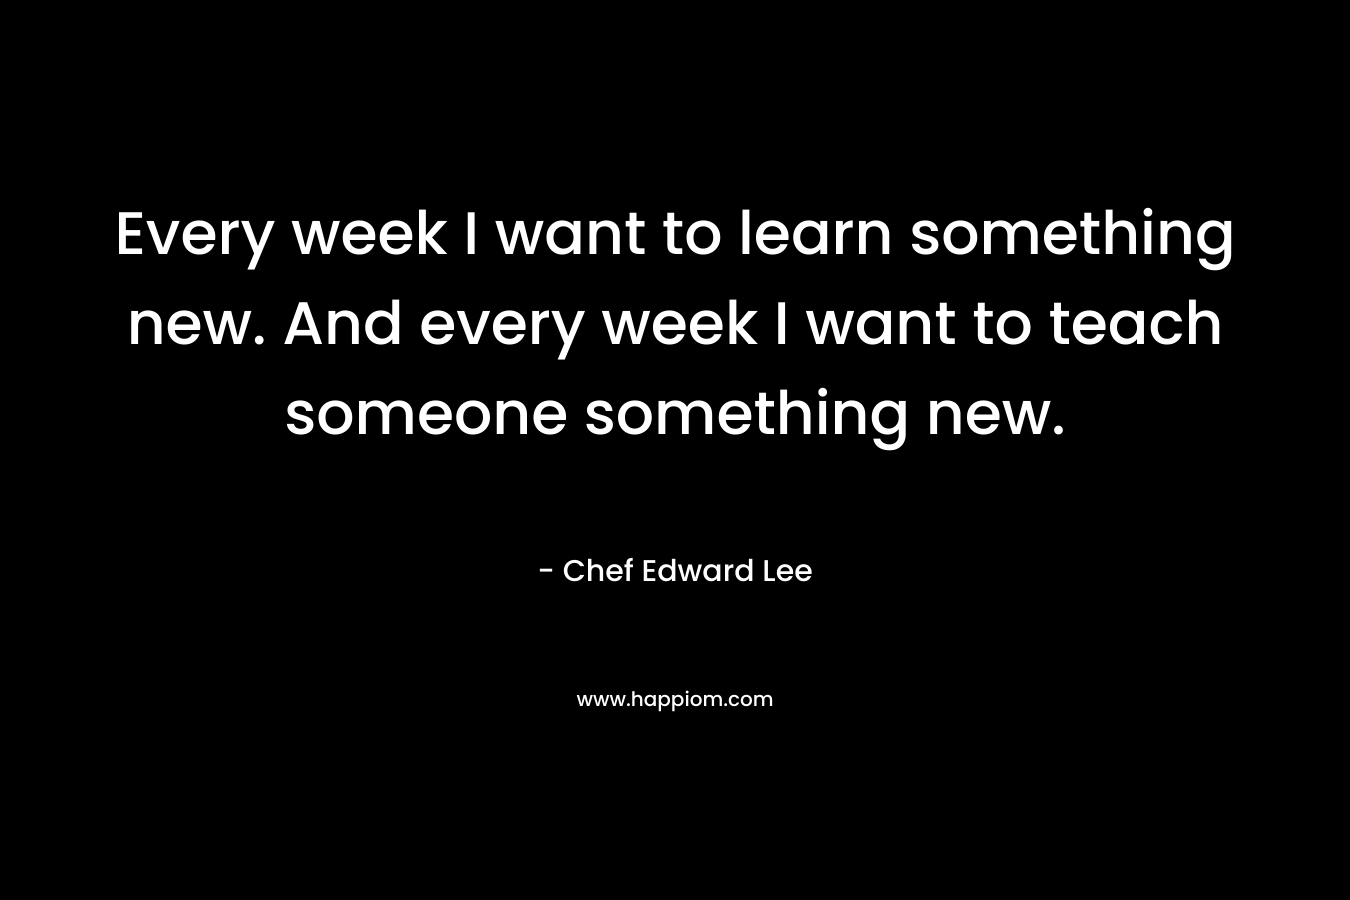 Every week I want to learn something new. And every week I want to teach someone something new.